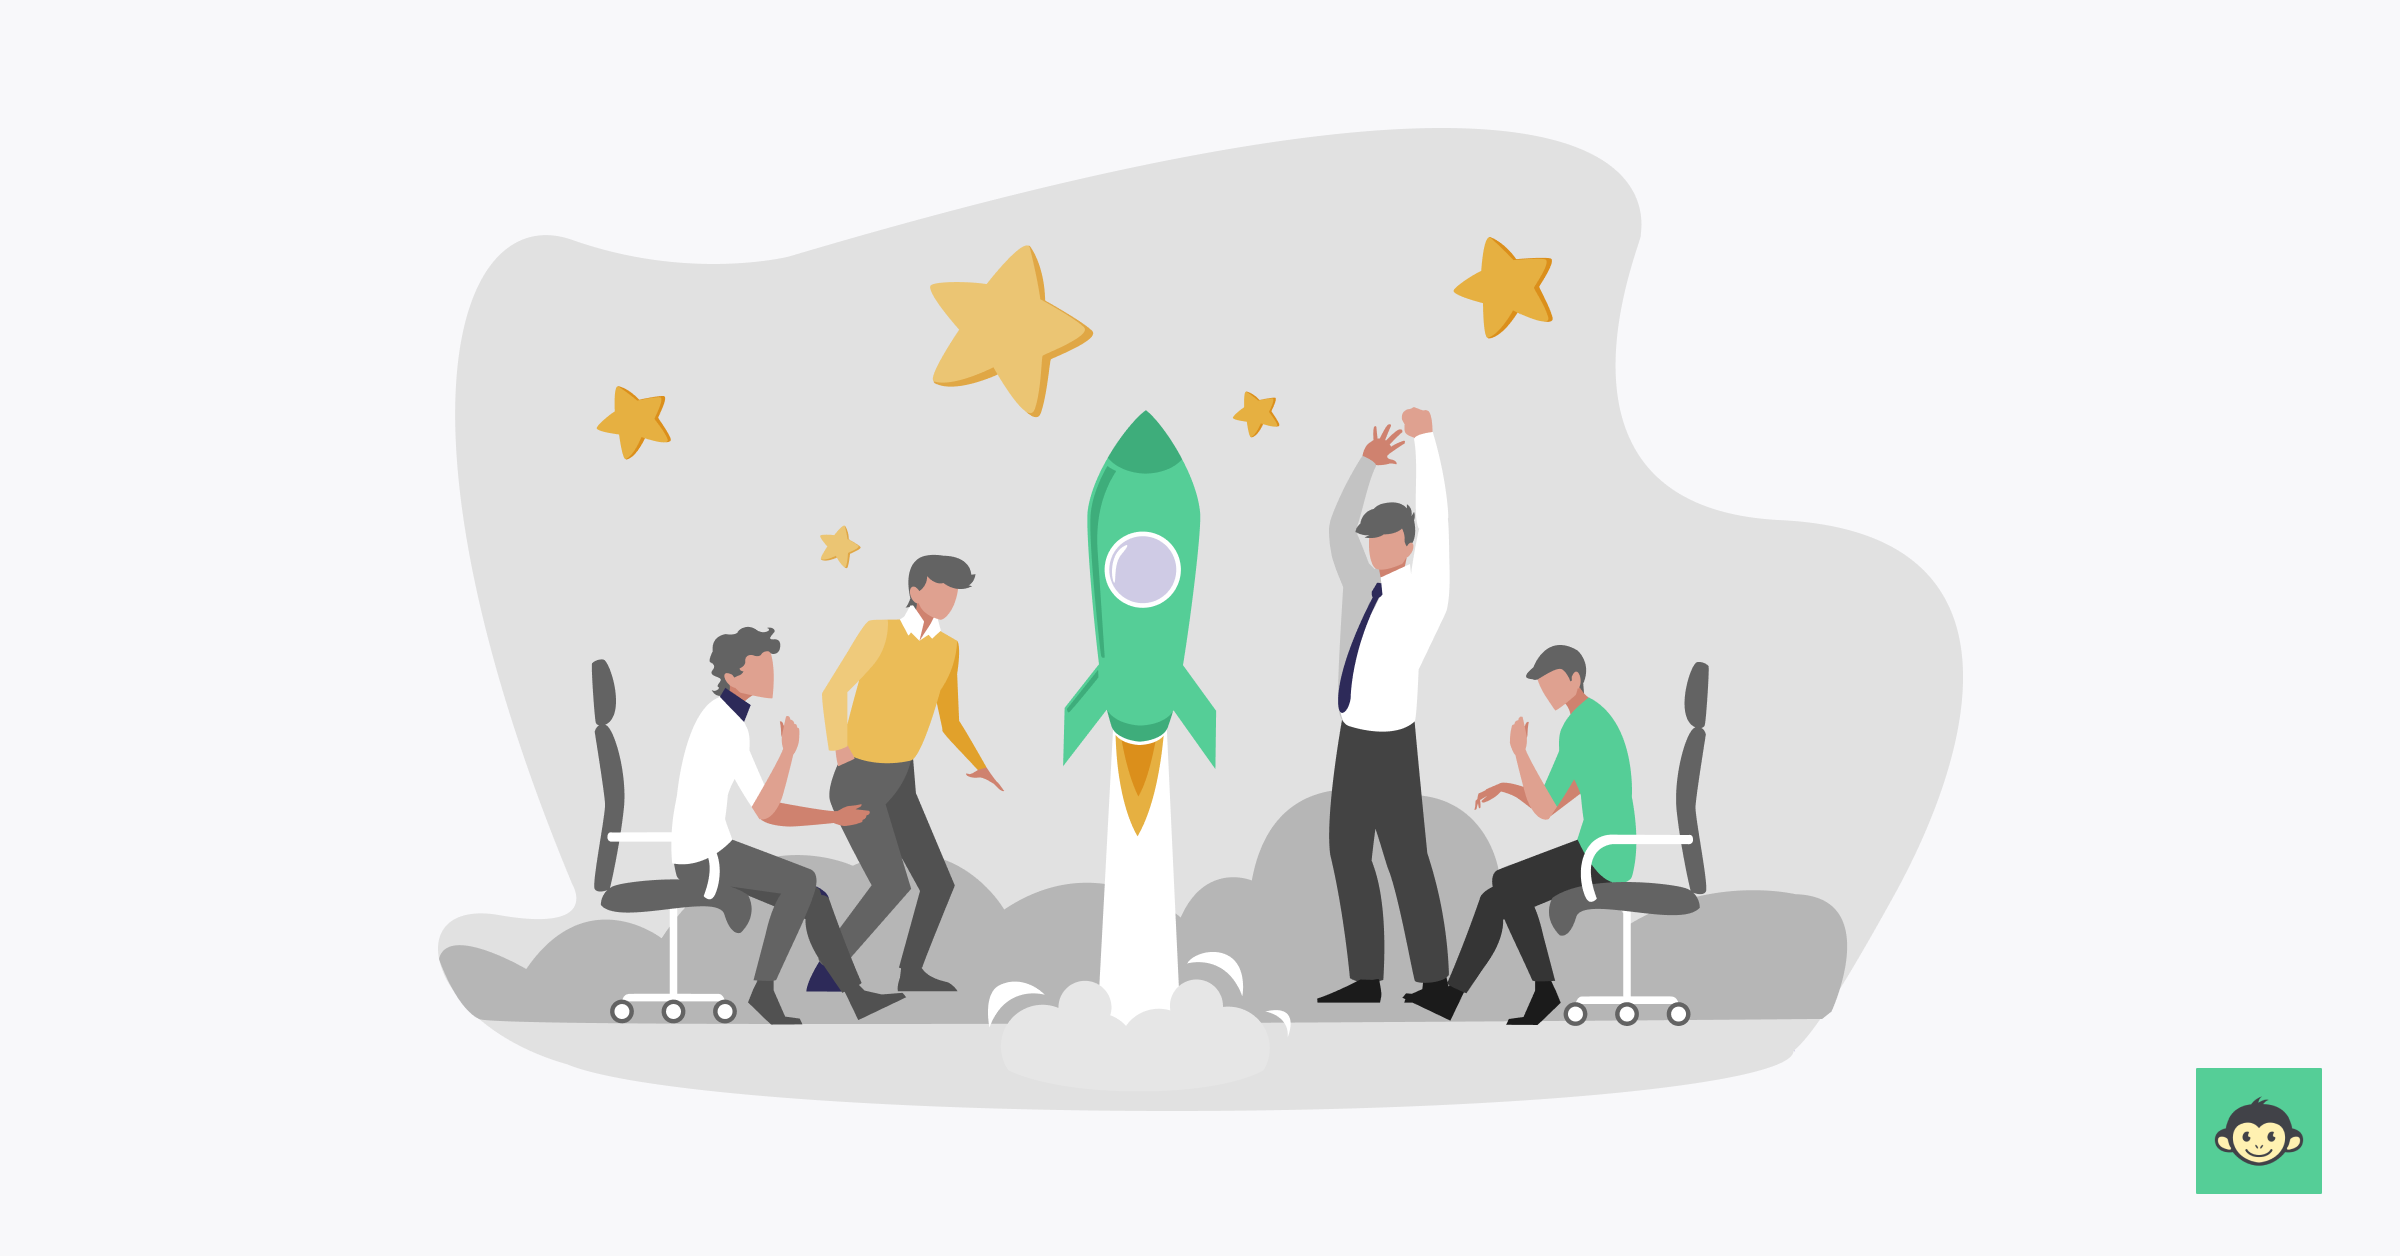 Employees are launching a rocket in the workplace